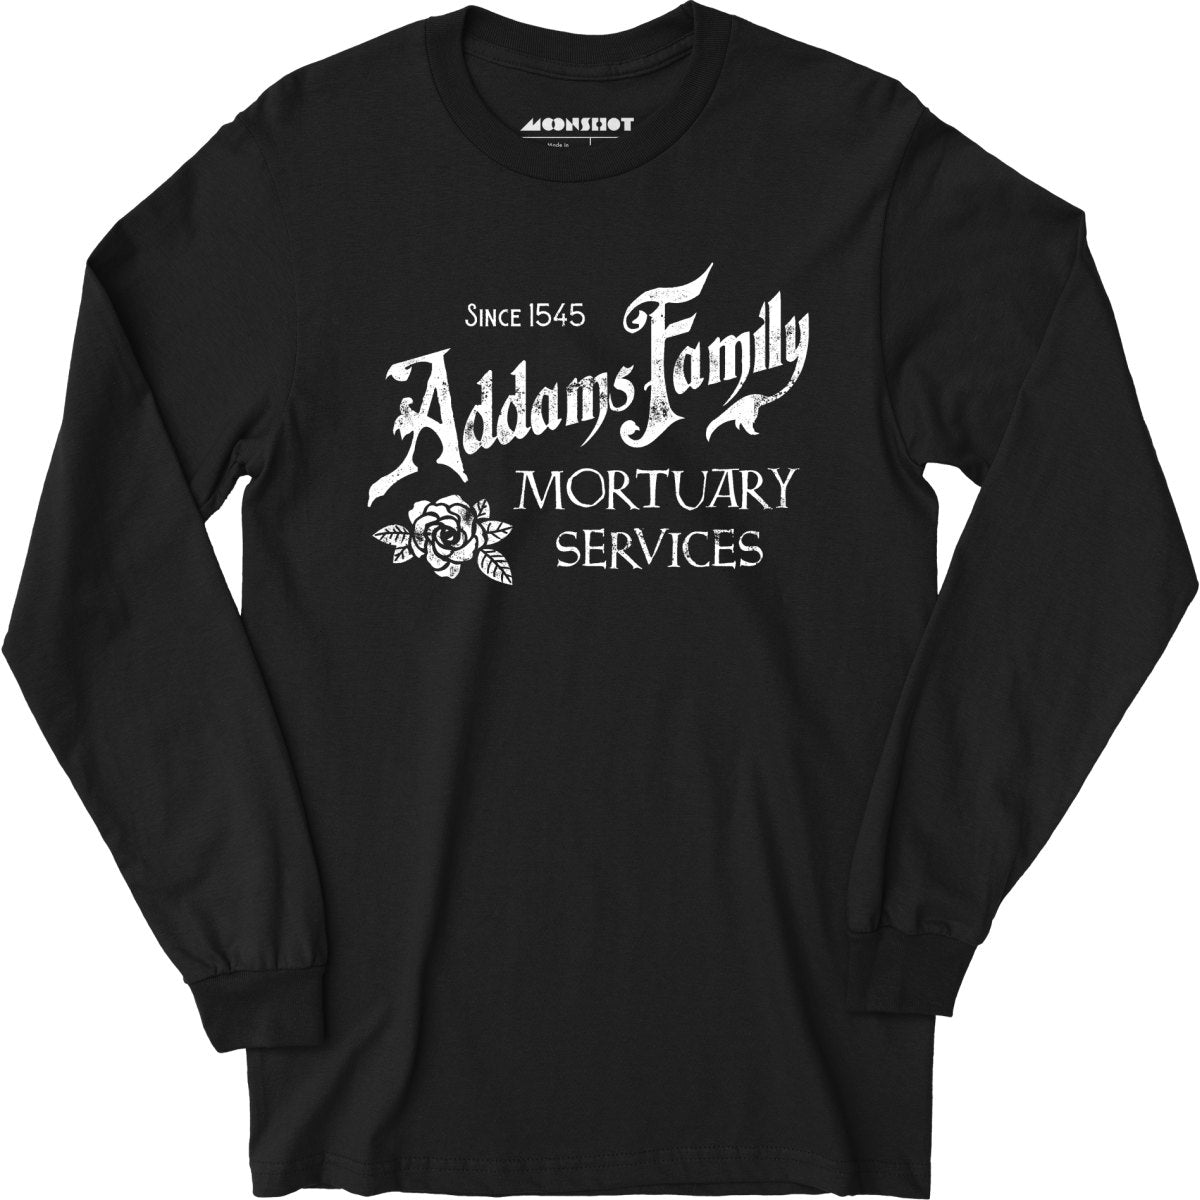 Addams Family Mortuary Services - Long Sleeve T-Shirt